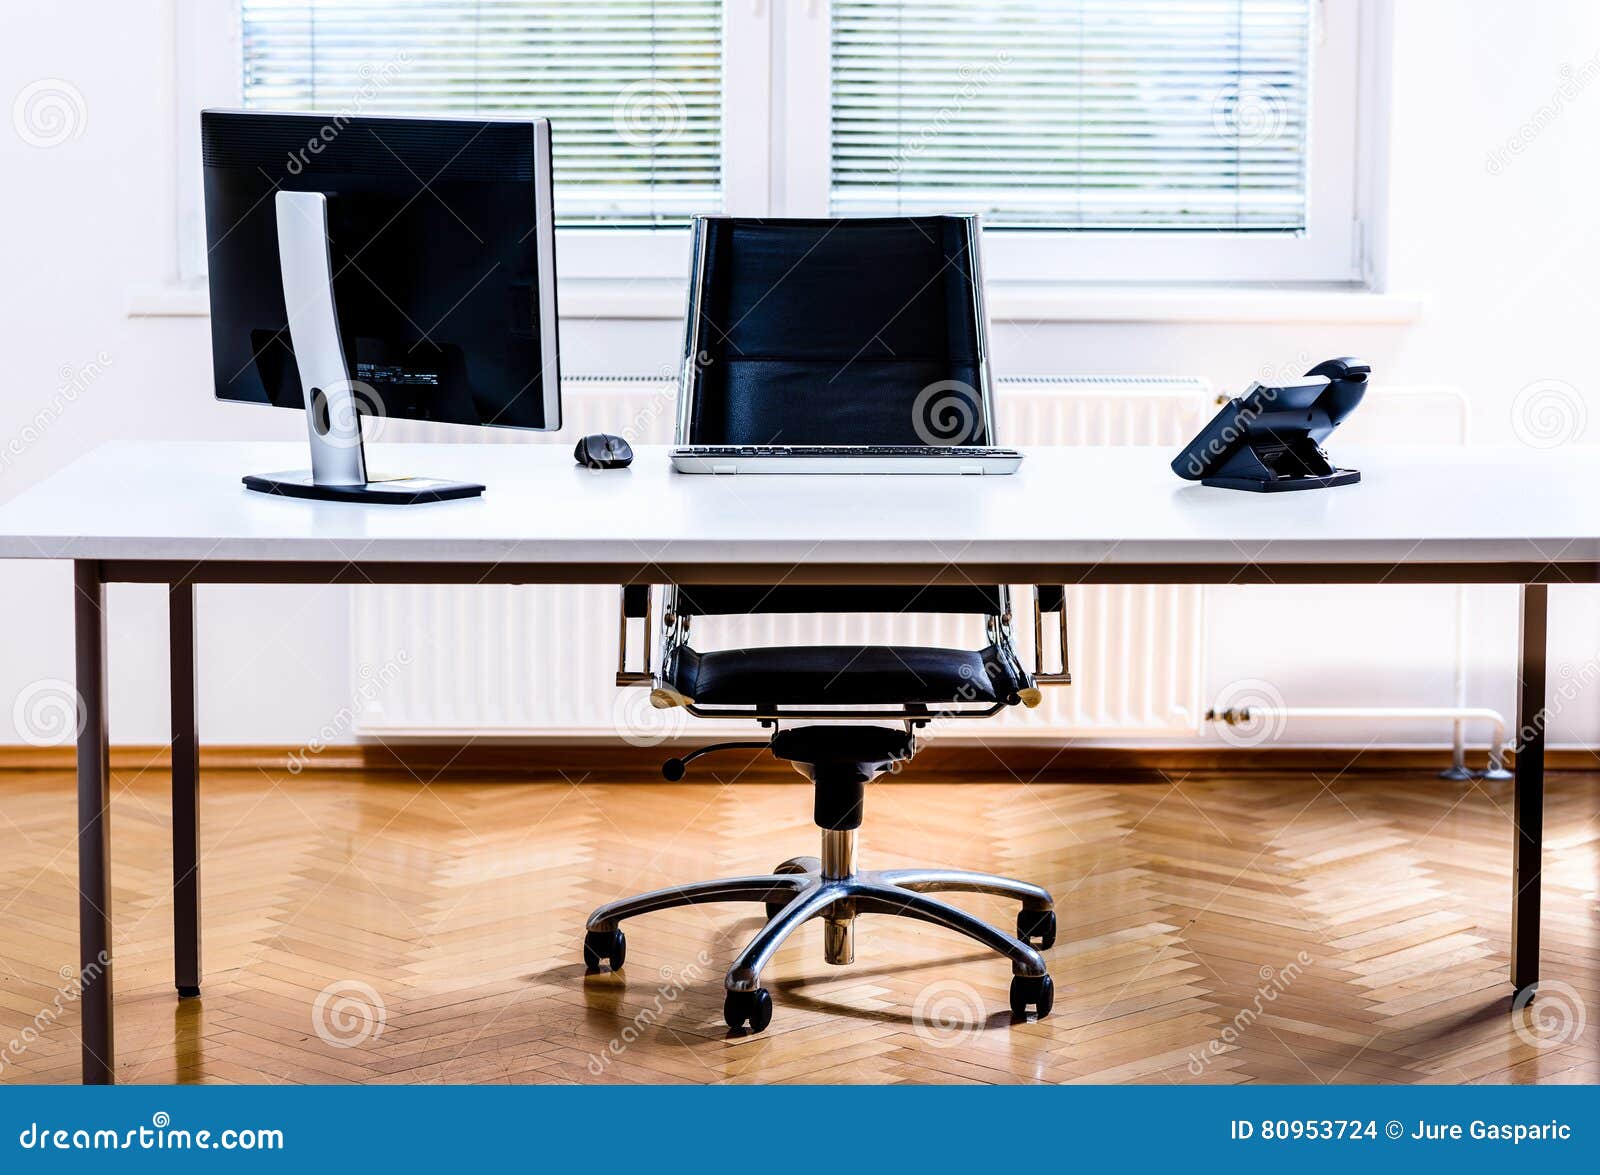 modern empty office space desk with computer, phone and chair.